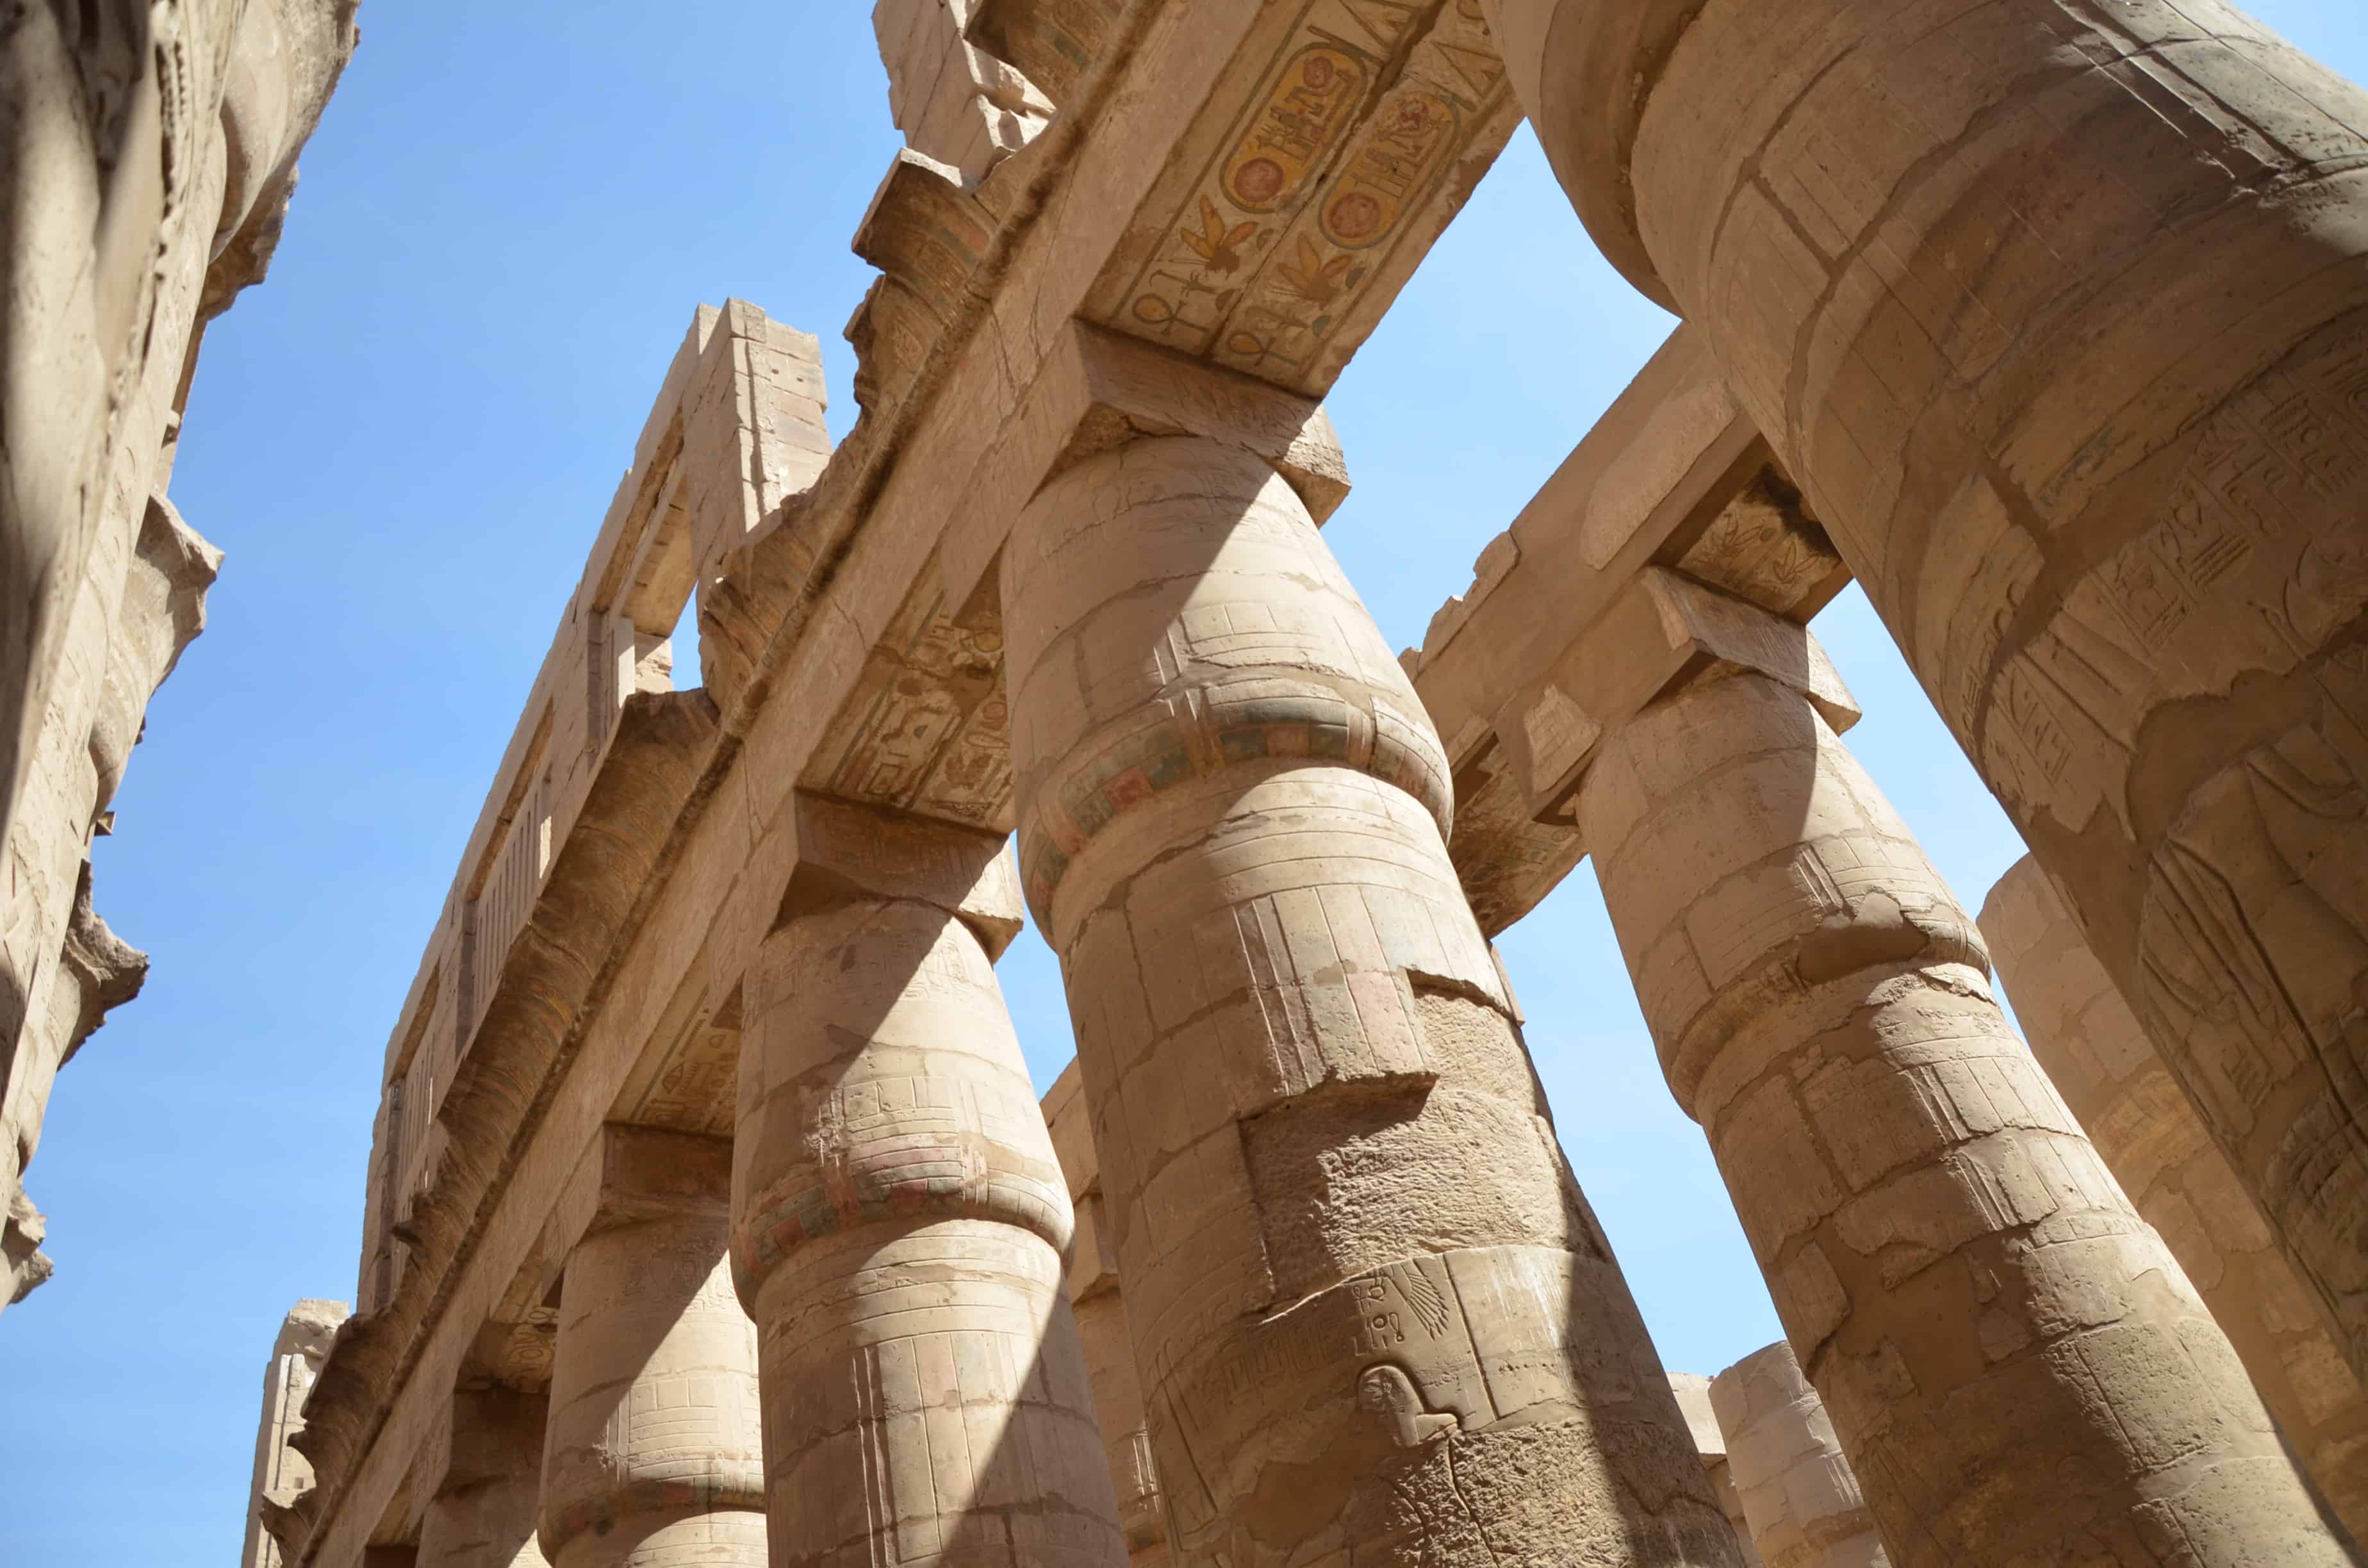 Hypostyle Hall at Karnak Temple in Luxor, Egypt